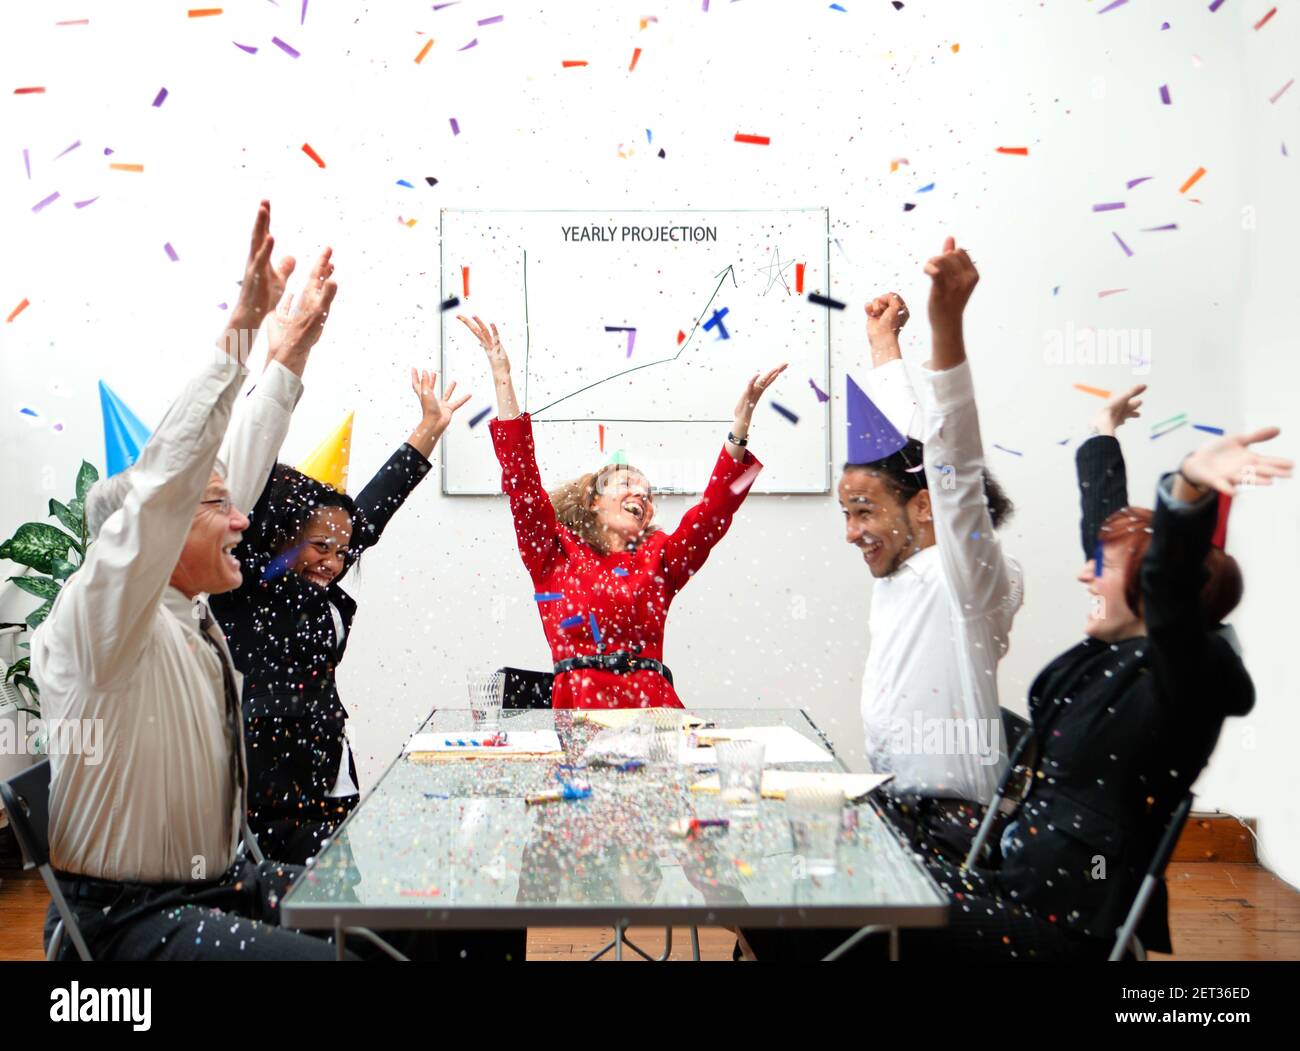 Ecstatic business people celebrate an excellent yearly projection with party hats and confetti. Humorous business concept. Stock Photo